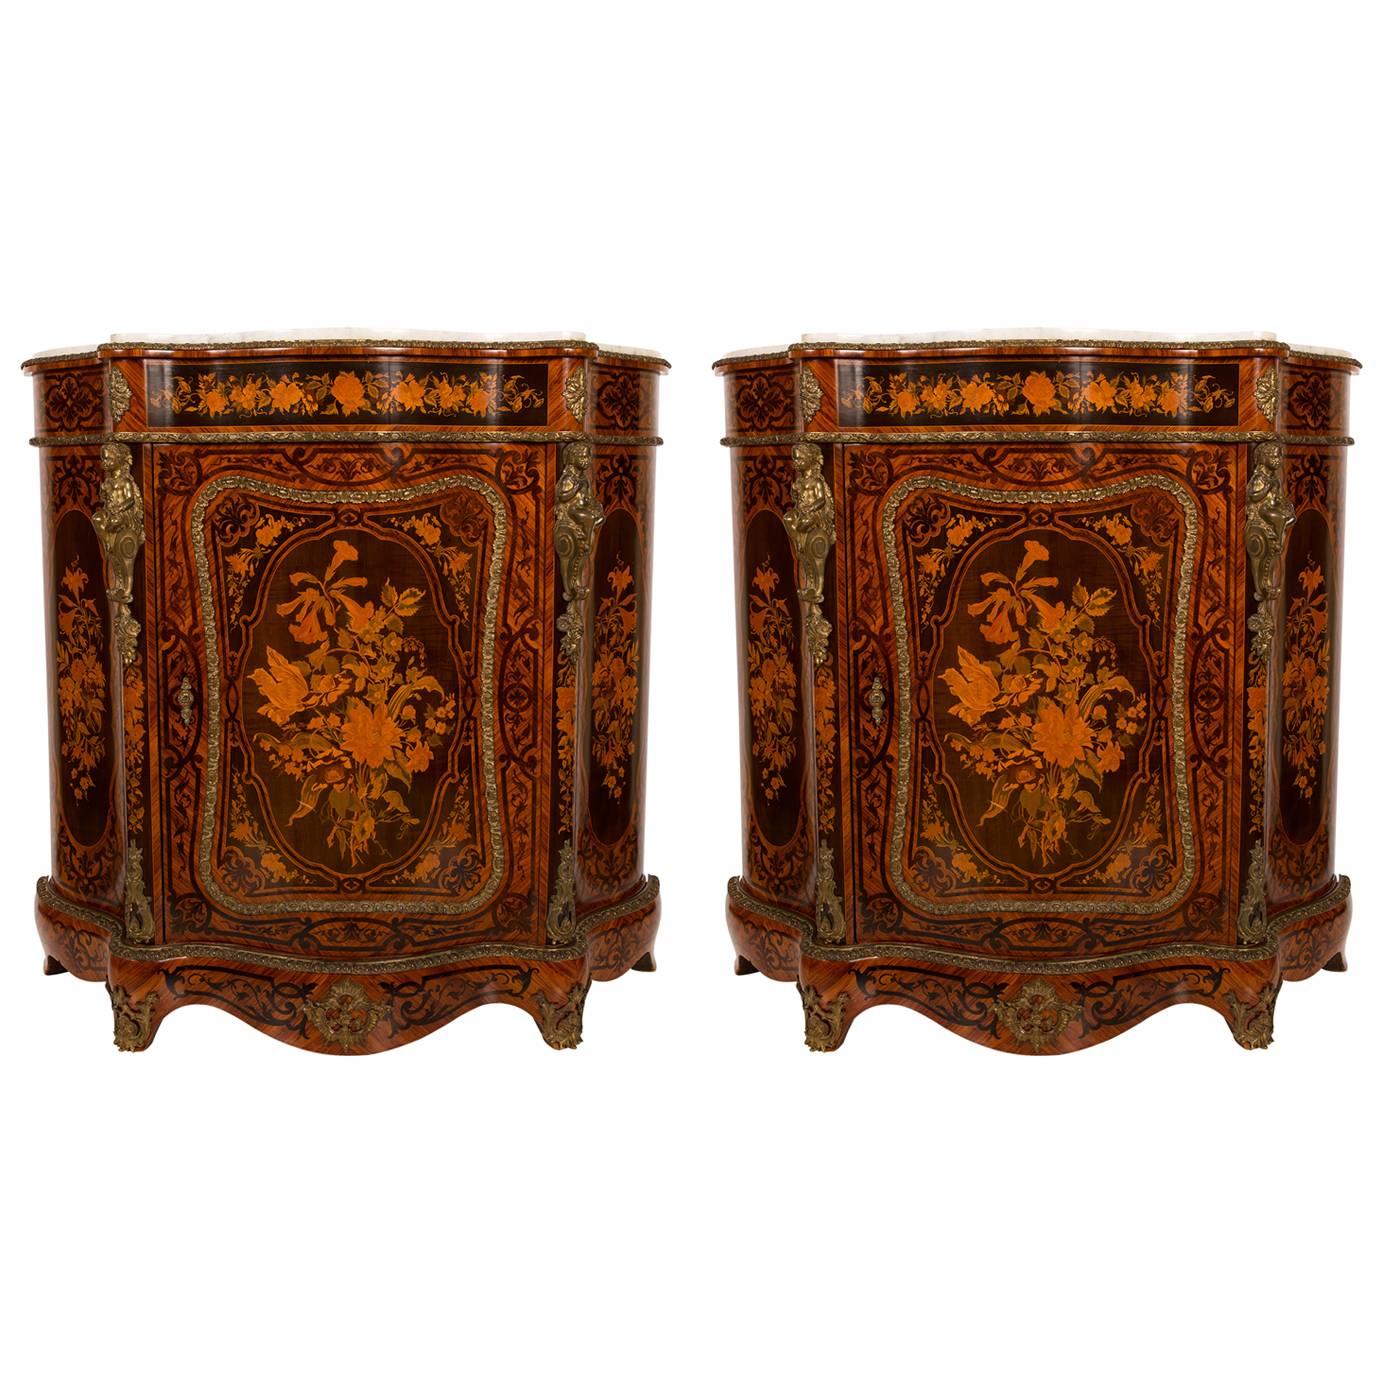 Pair of French Serpentine Flower Marquetry Inlaid Meubles D´Appui, circa 1880 For Sale